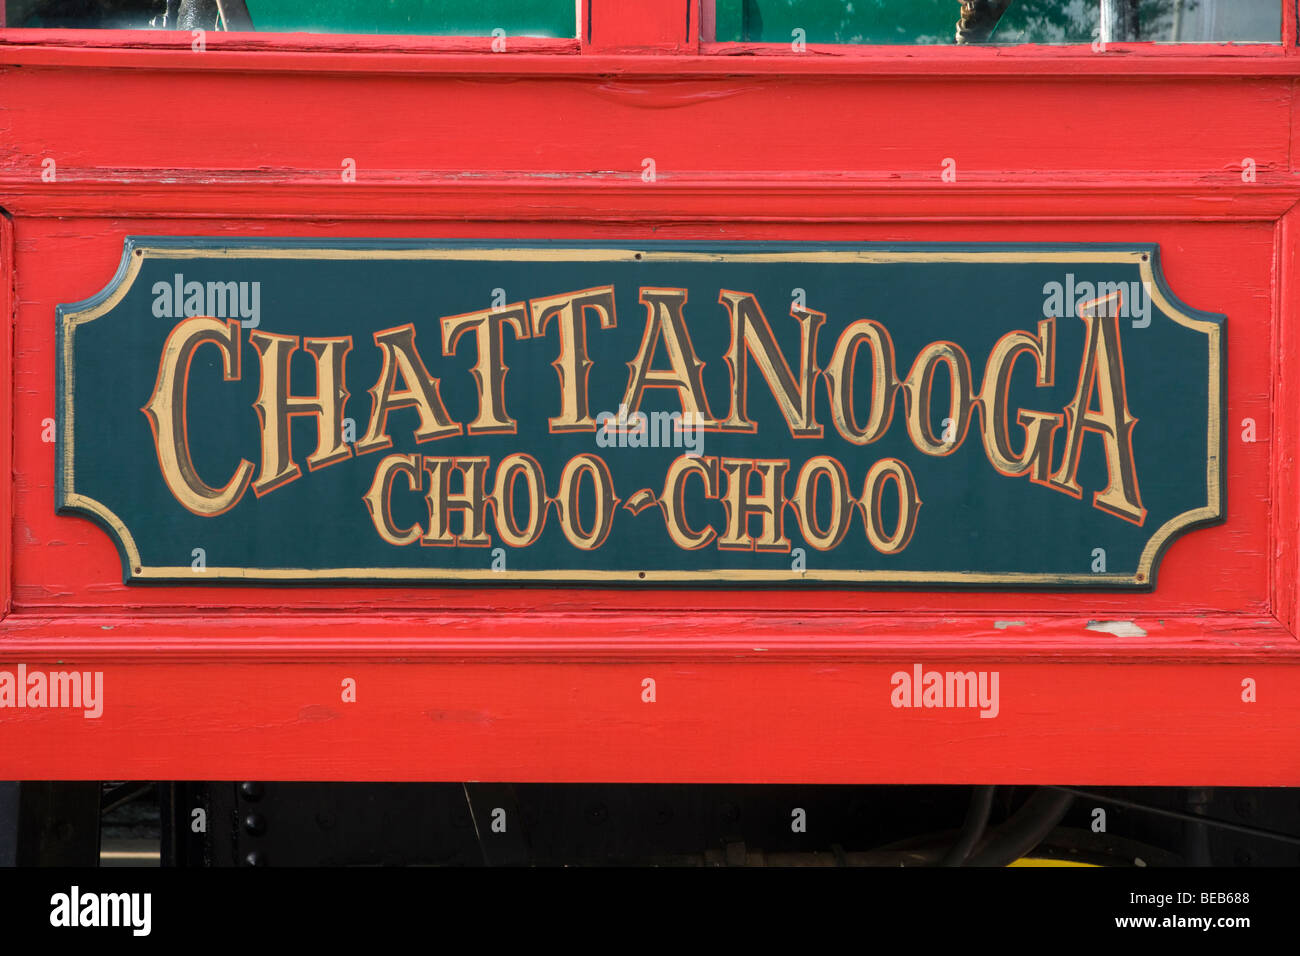 Chattanooga Choo Choo sign on a train in Chattanooga, Tennessee, USA Stock Photo